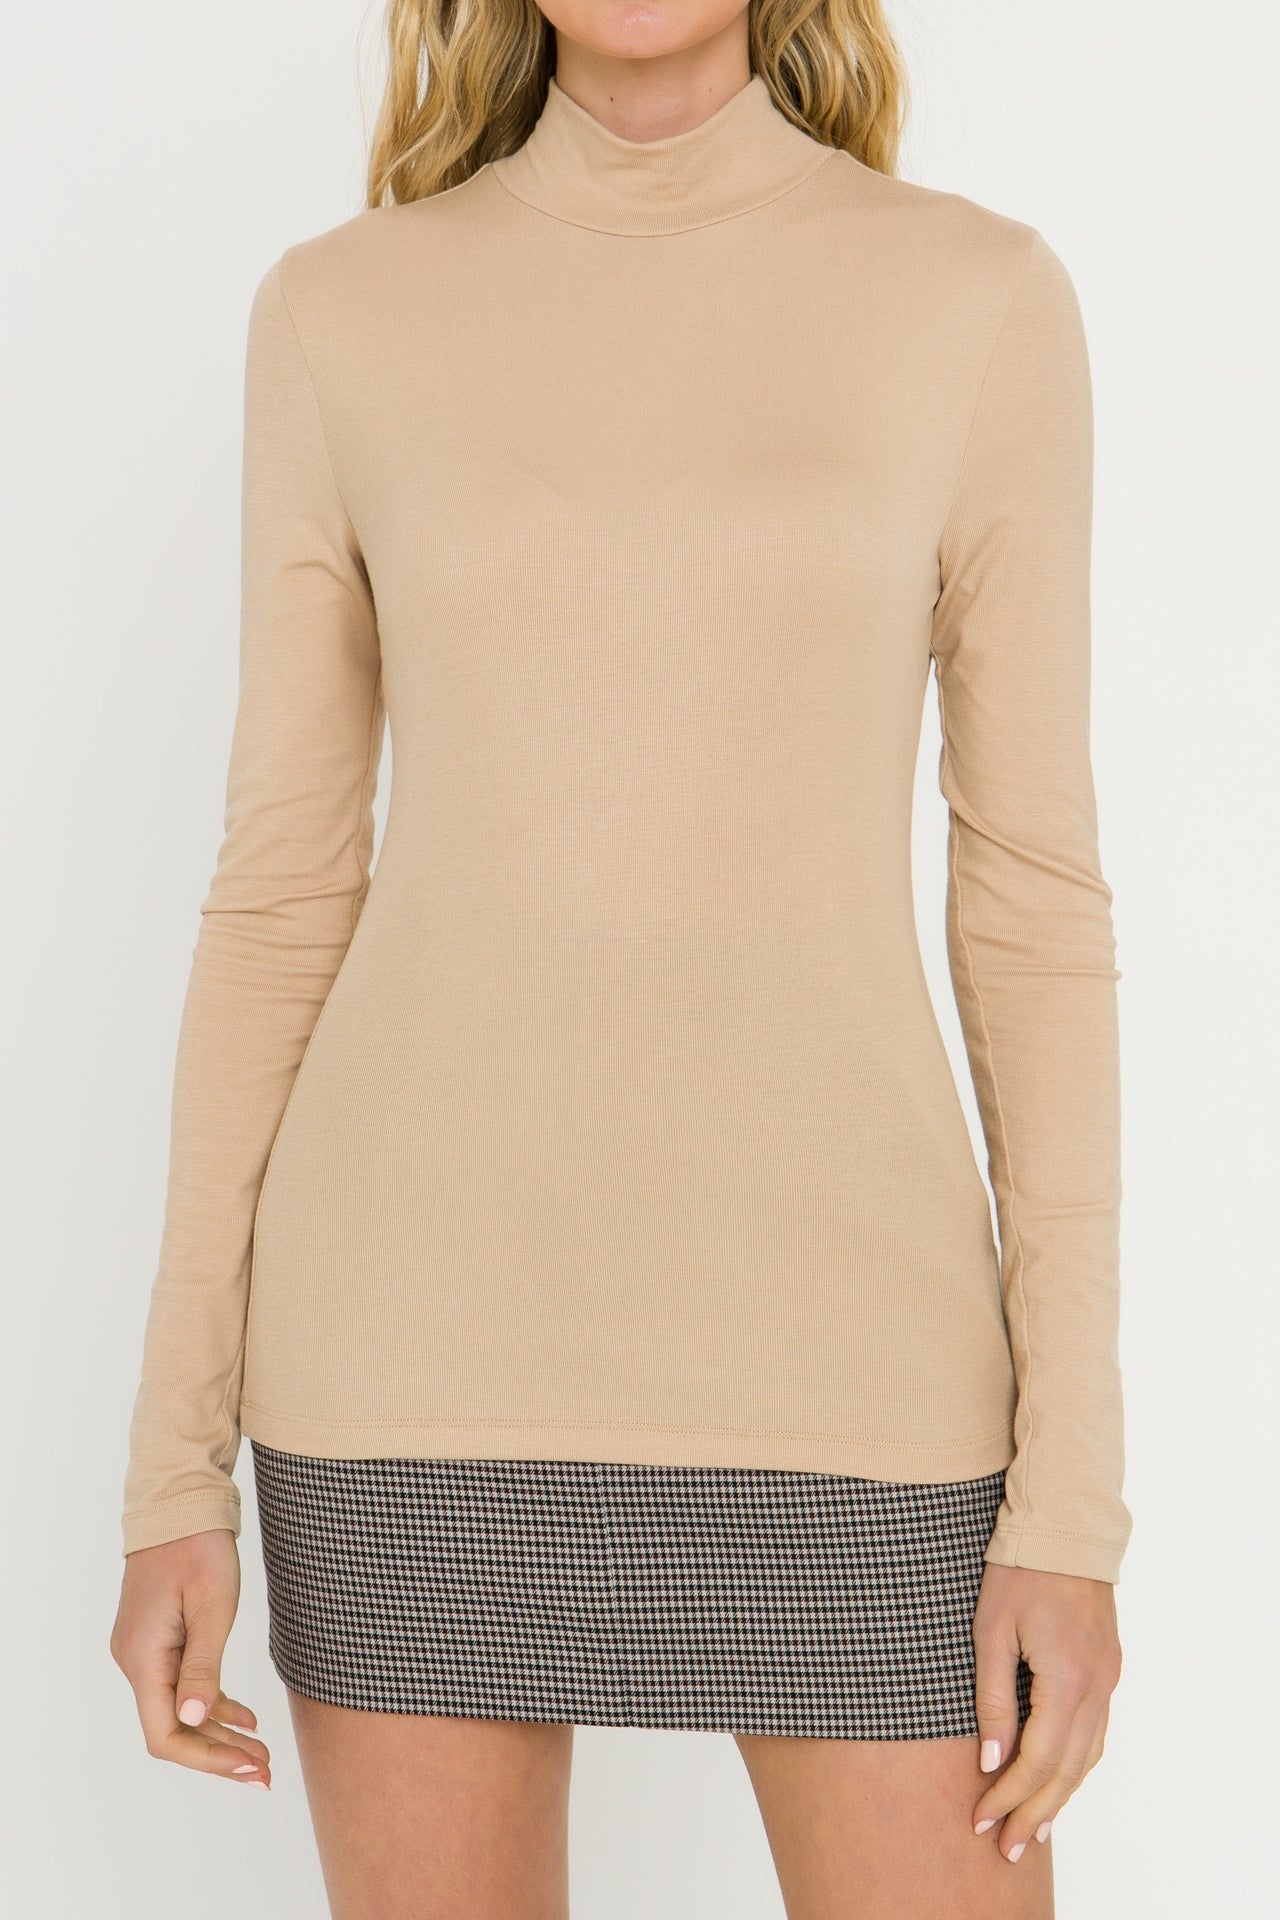 Fitted Turtle Neck Top in Tan